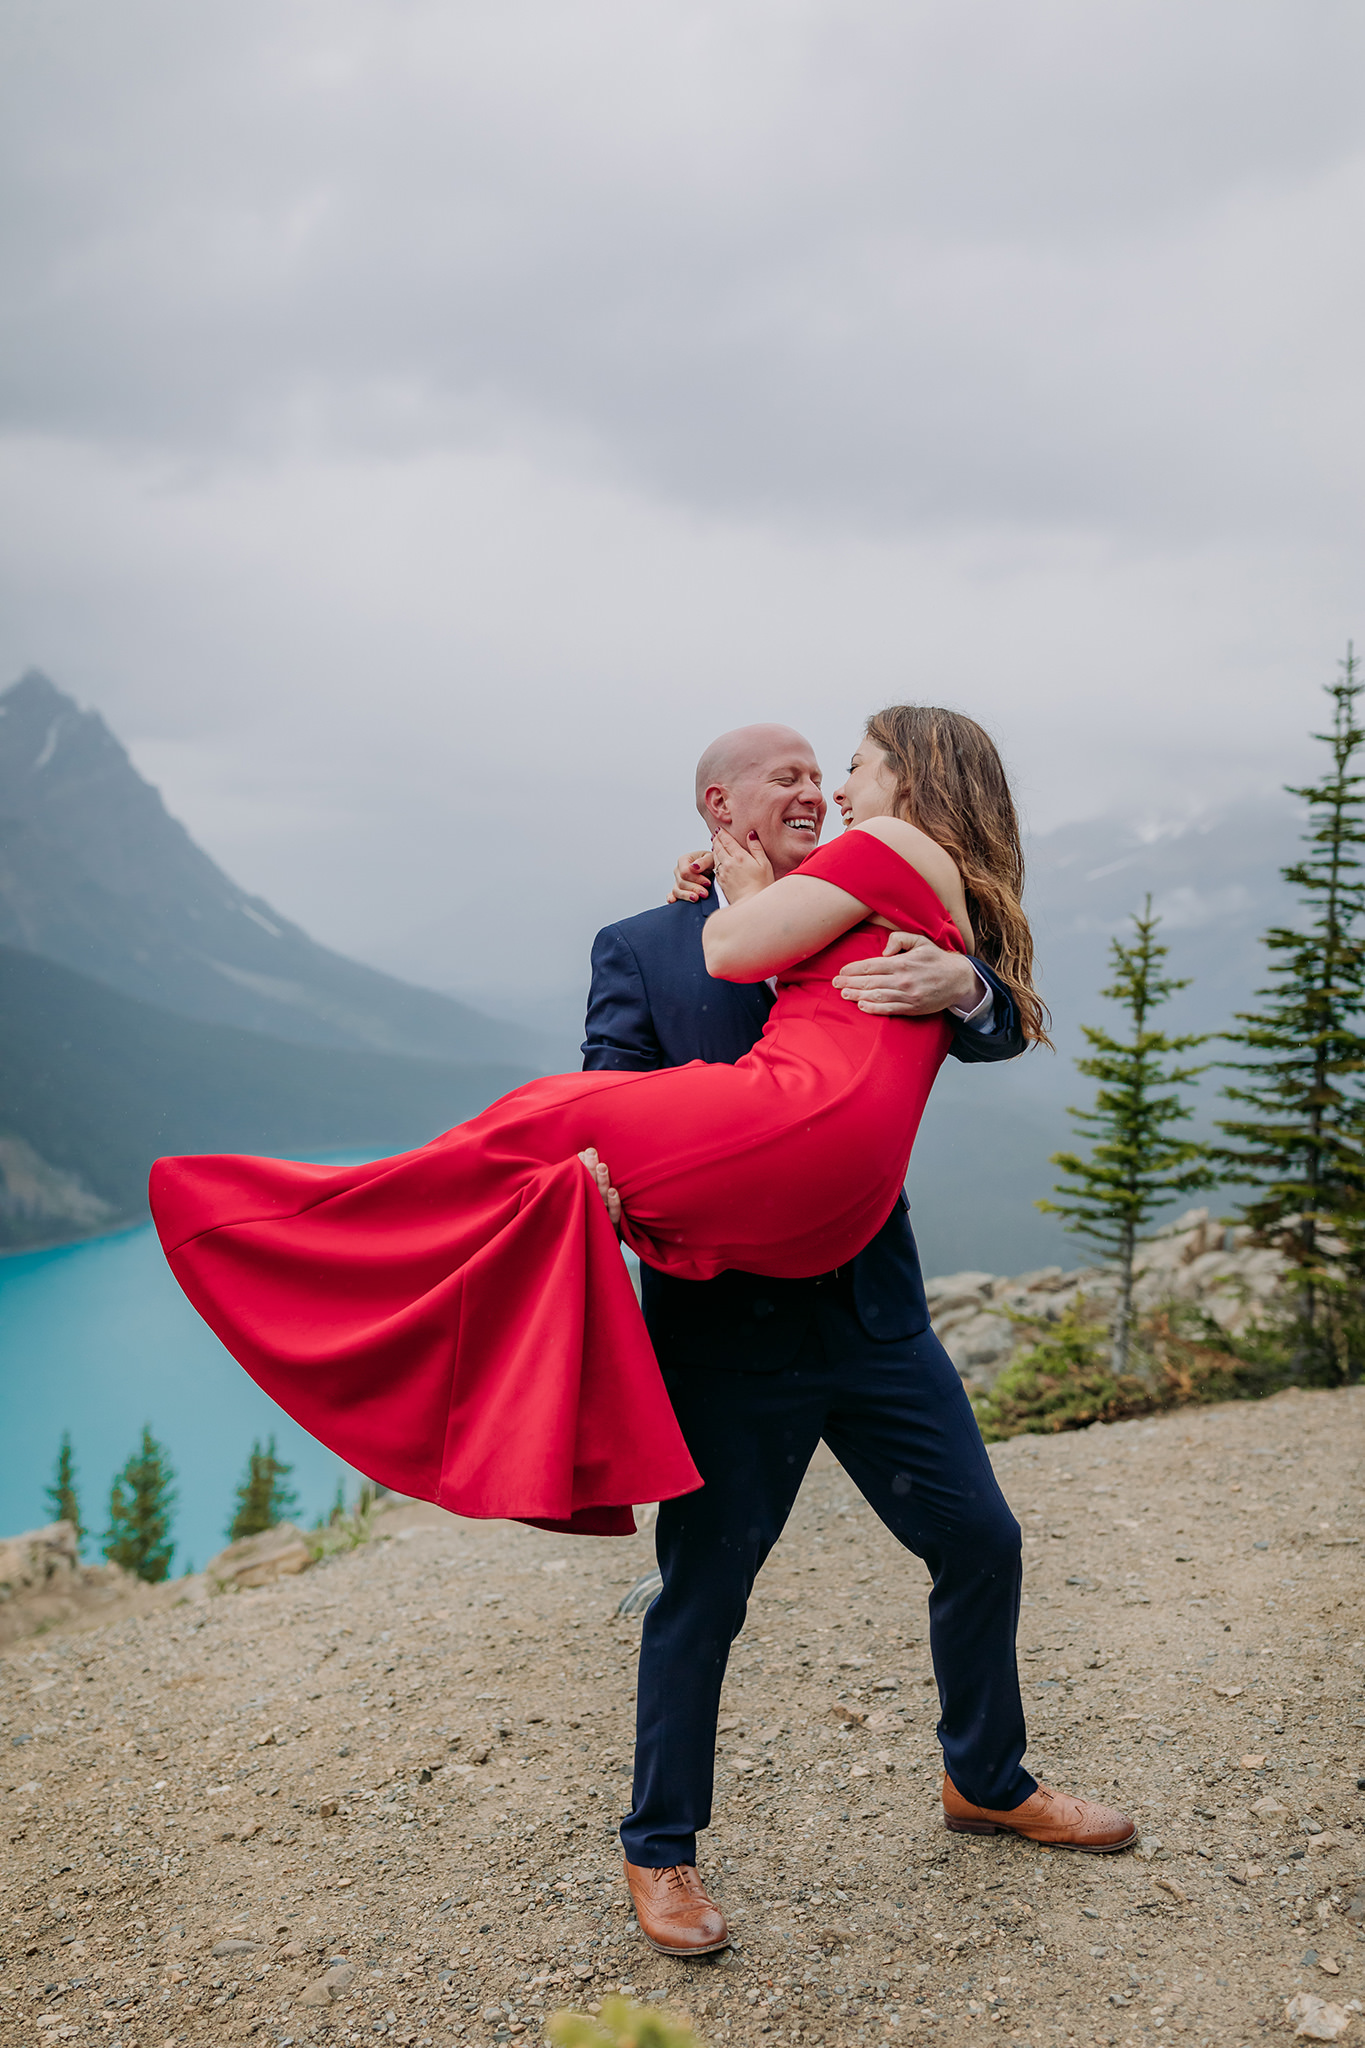 Bow Summit on Icefields Parkway couples vacation photos on a cold rainy day in the mountains in Banff National Park. Featuring stunning red evening gown & dramatic mountain views photographed by ENV Photography